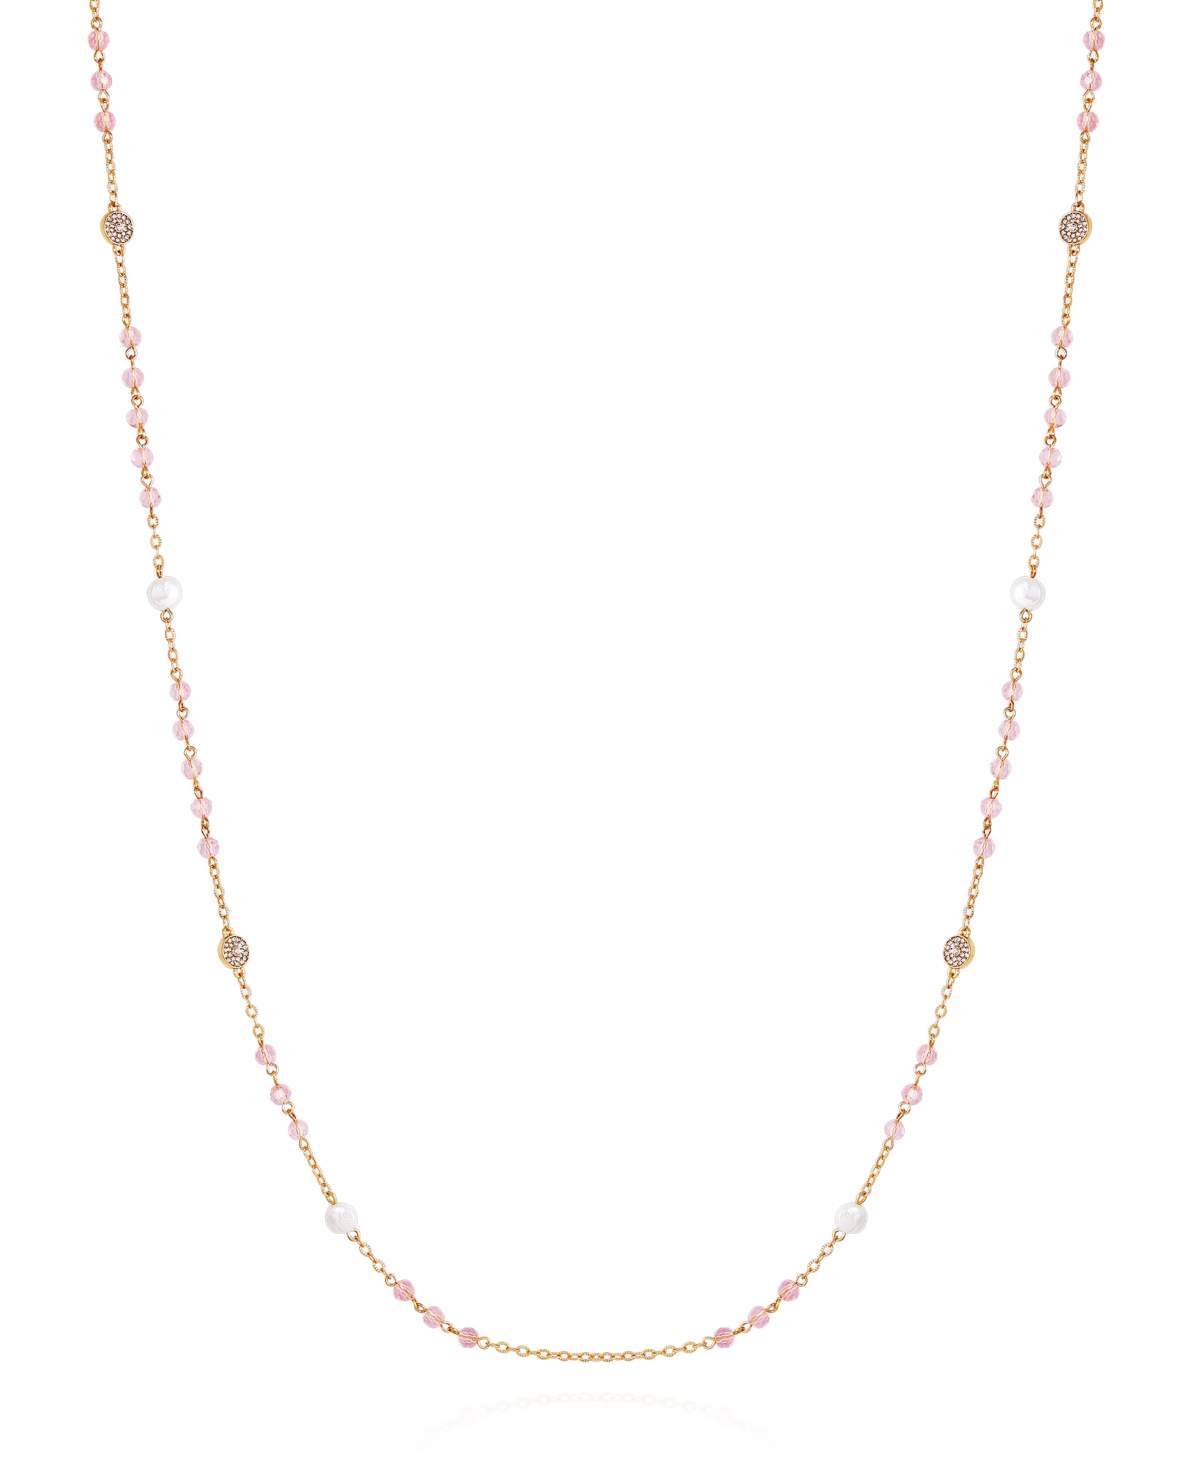 Gold-Tone Long Dainty Necklace - Gold